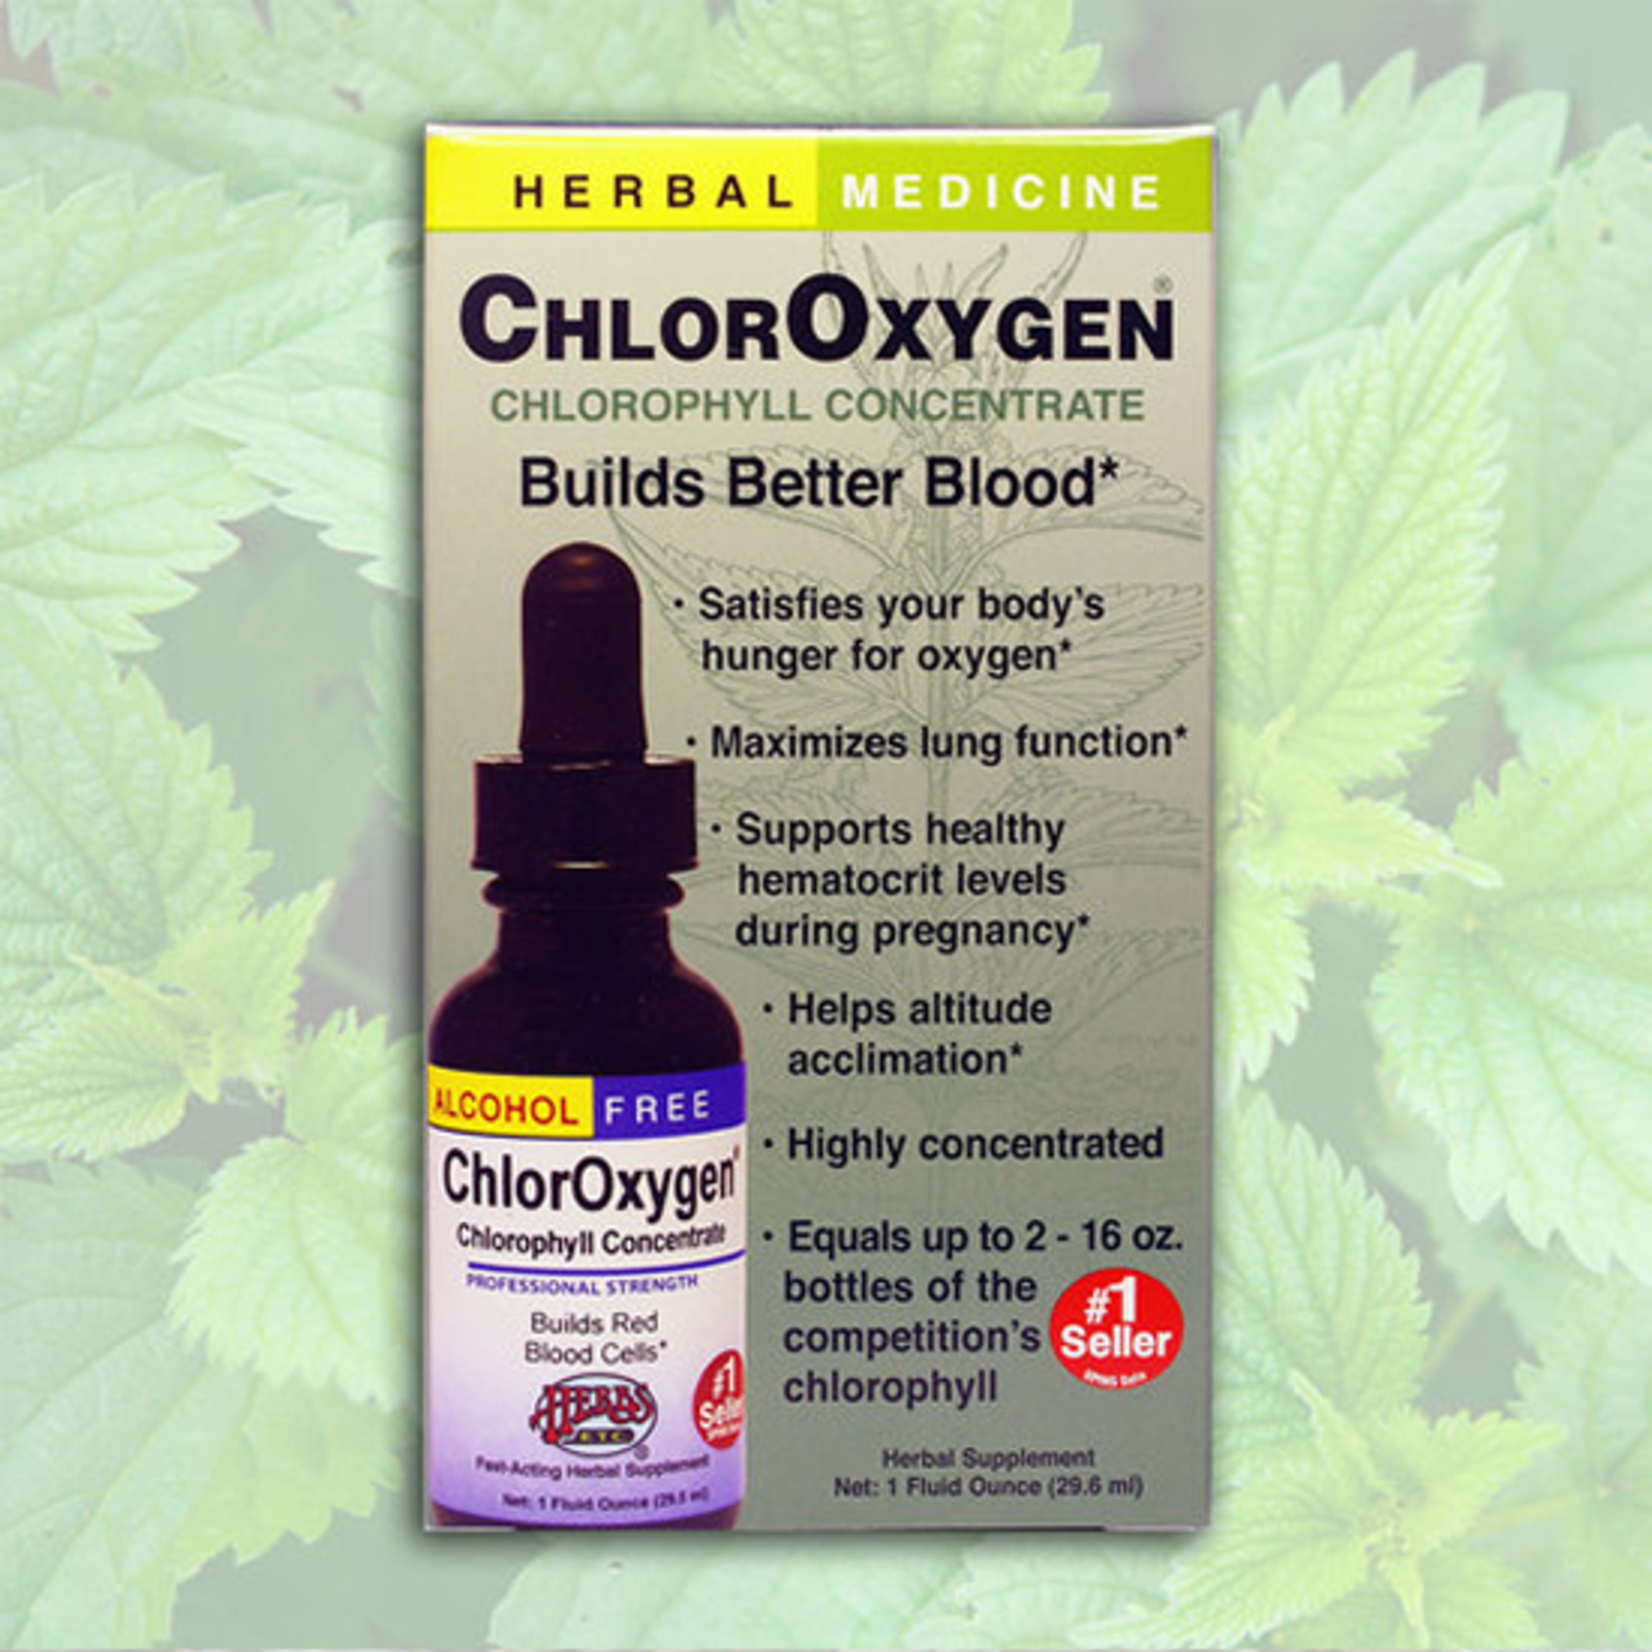 Herbs Etc Herbs Etc - Chloroxygen Chlorophyll Concentrate Alcohol Free - 1 oz